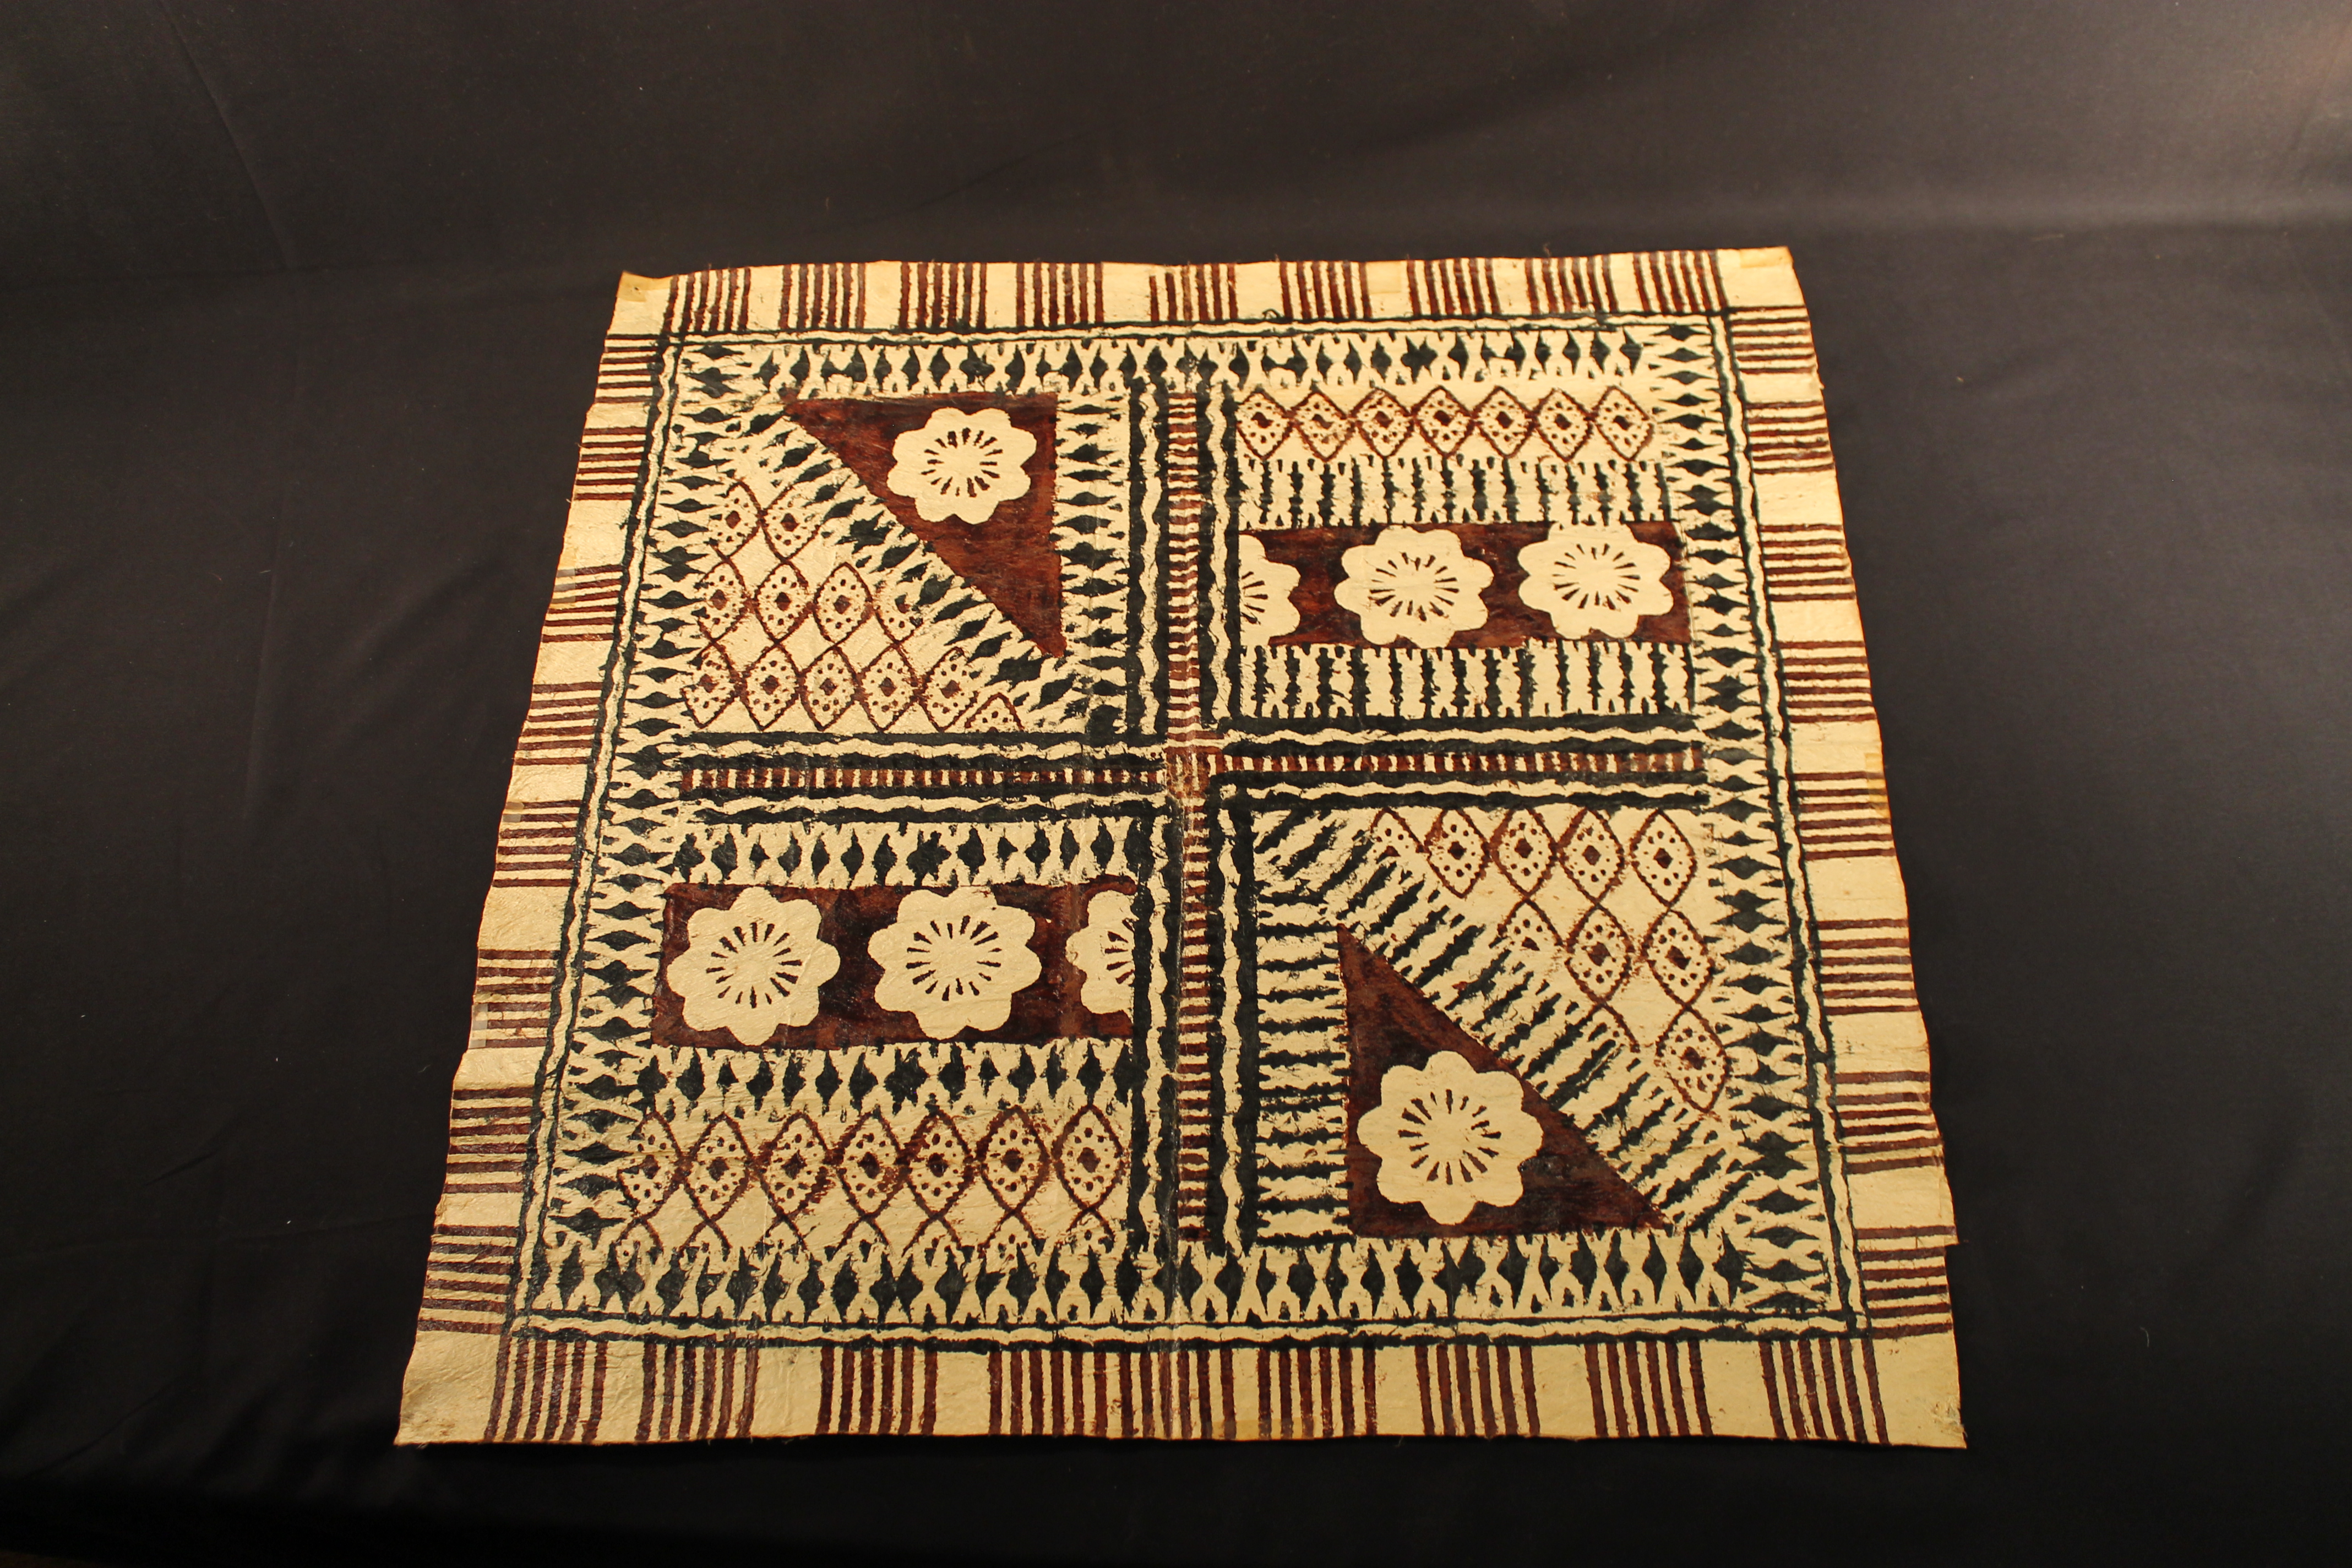 Square bark cloth made of flattened wood with black, red, and maroon-colored designs on a tan background.